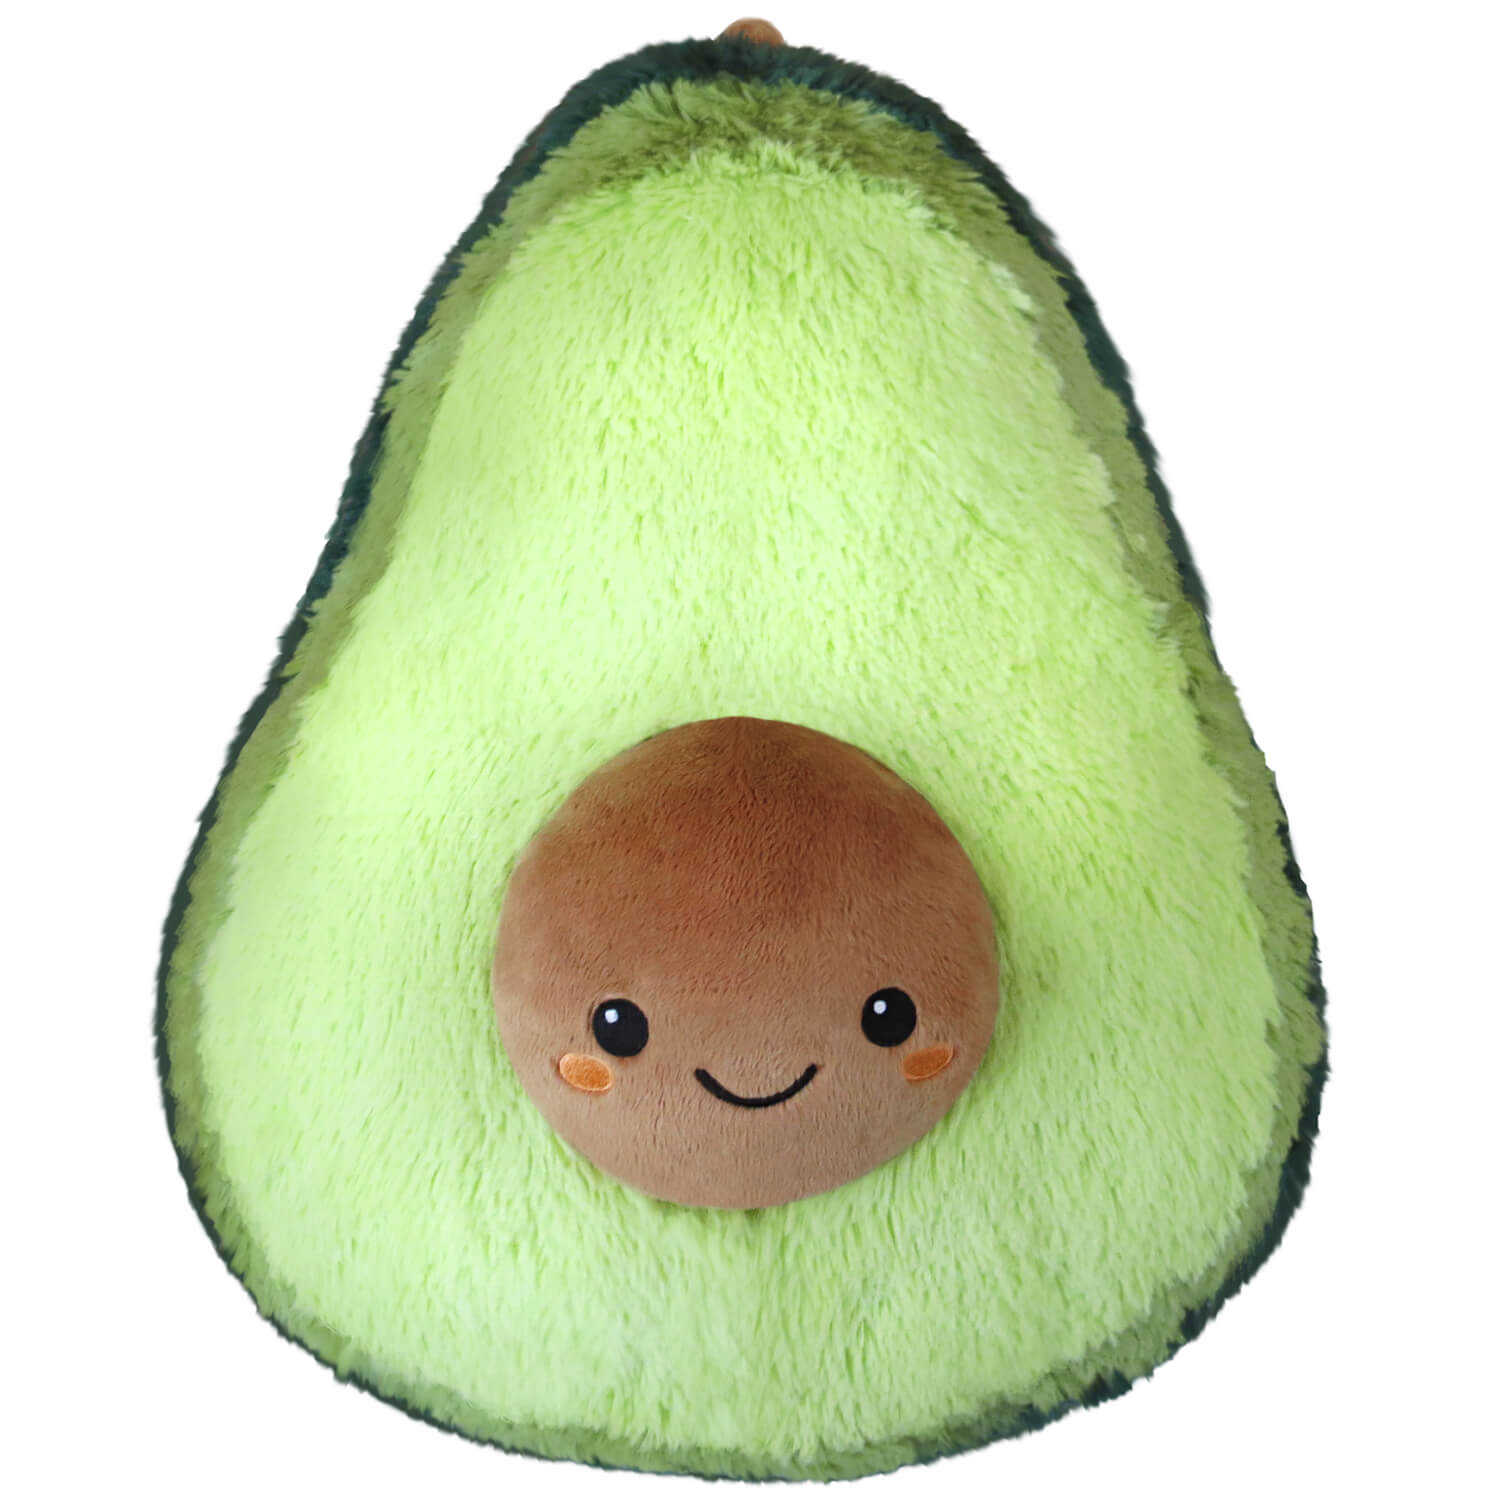 Squishable avocado is green with a smiling tan face. Front view.